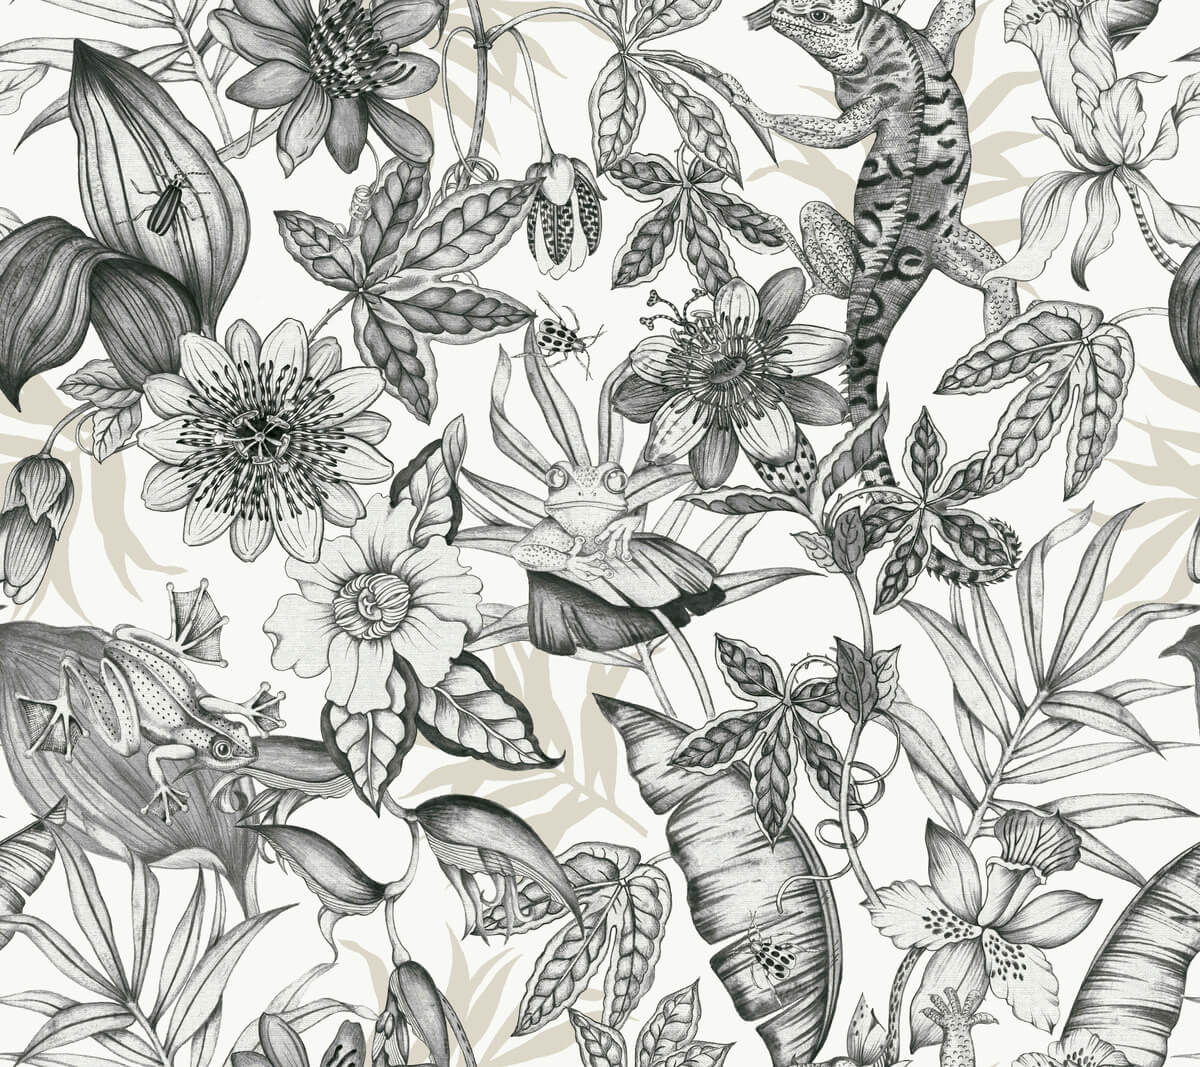 Blooms Second Edition Rainforest Wallpaper - Charcoal